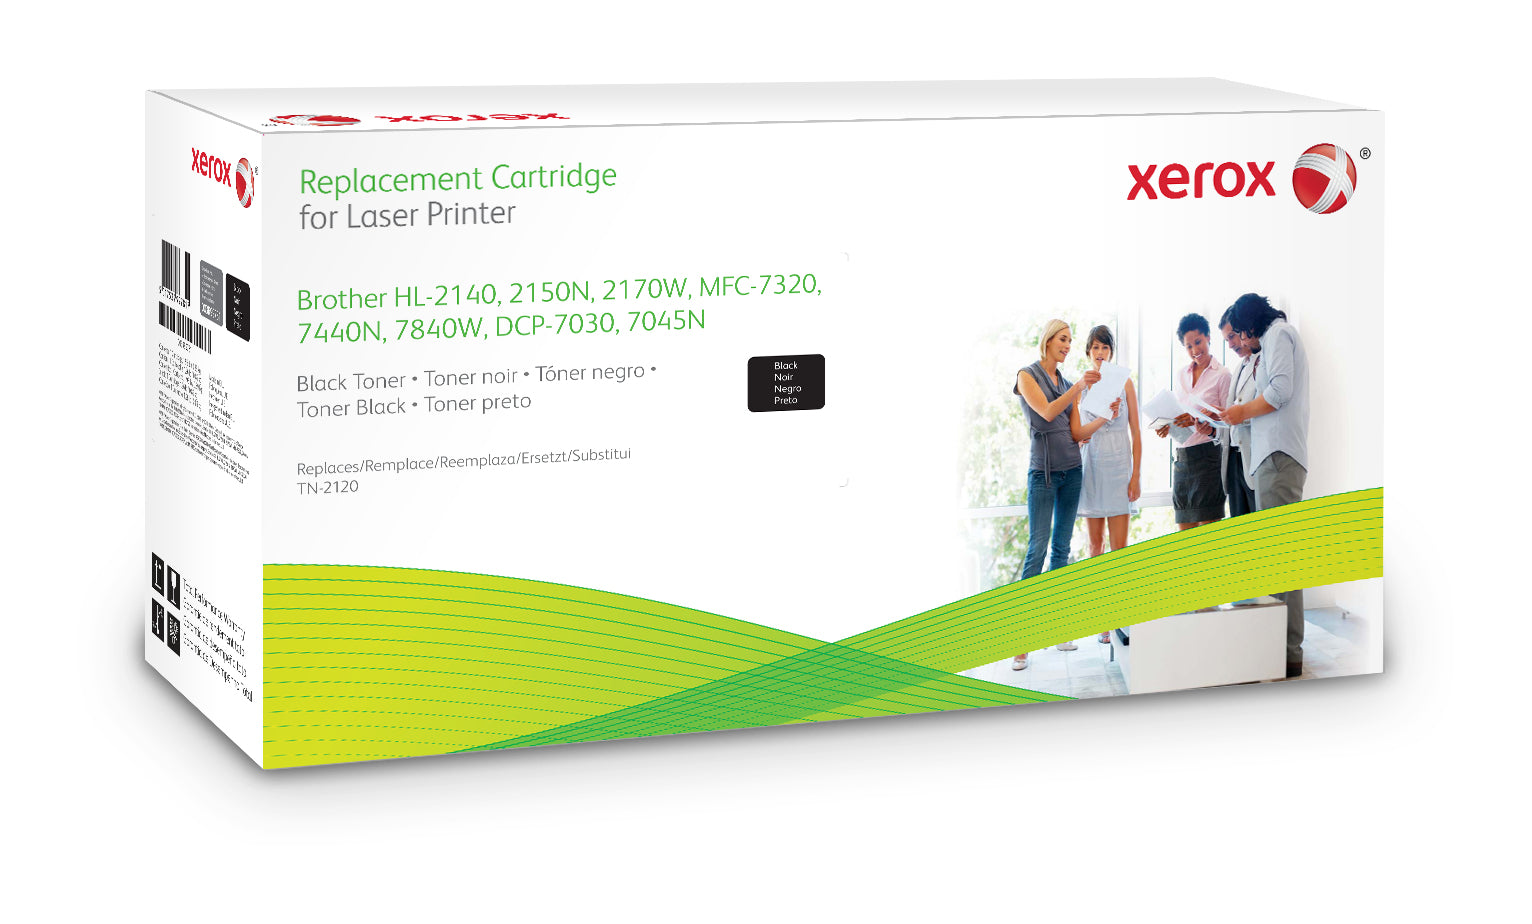 Xerox 003R99781 Toner-kit, 2.6K pages/5% (replaces Brother TN2120) for Brother HL-2140